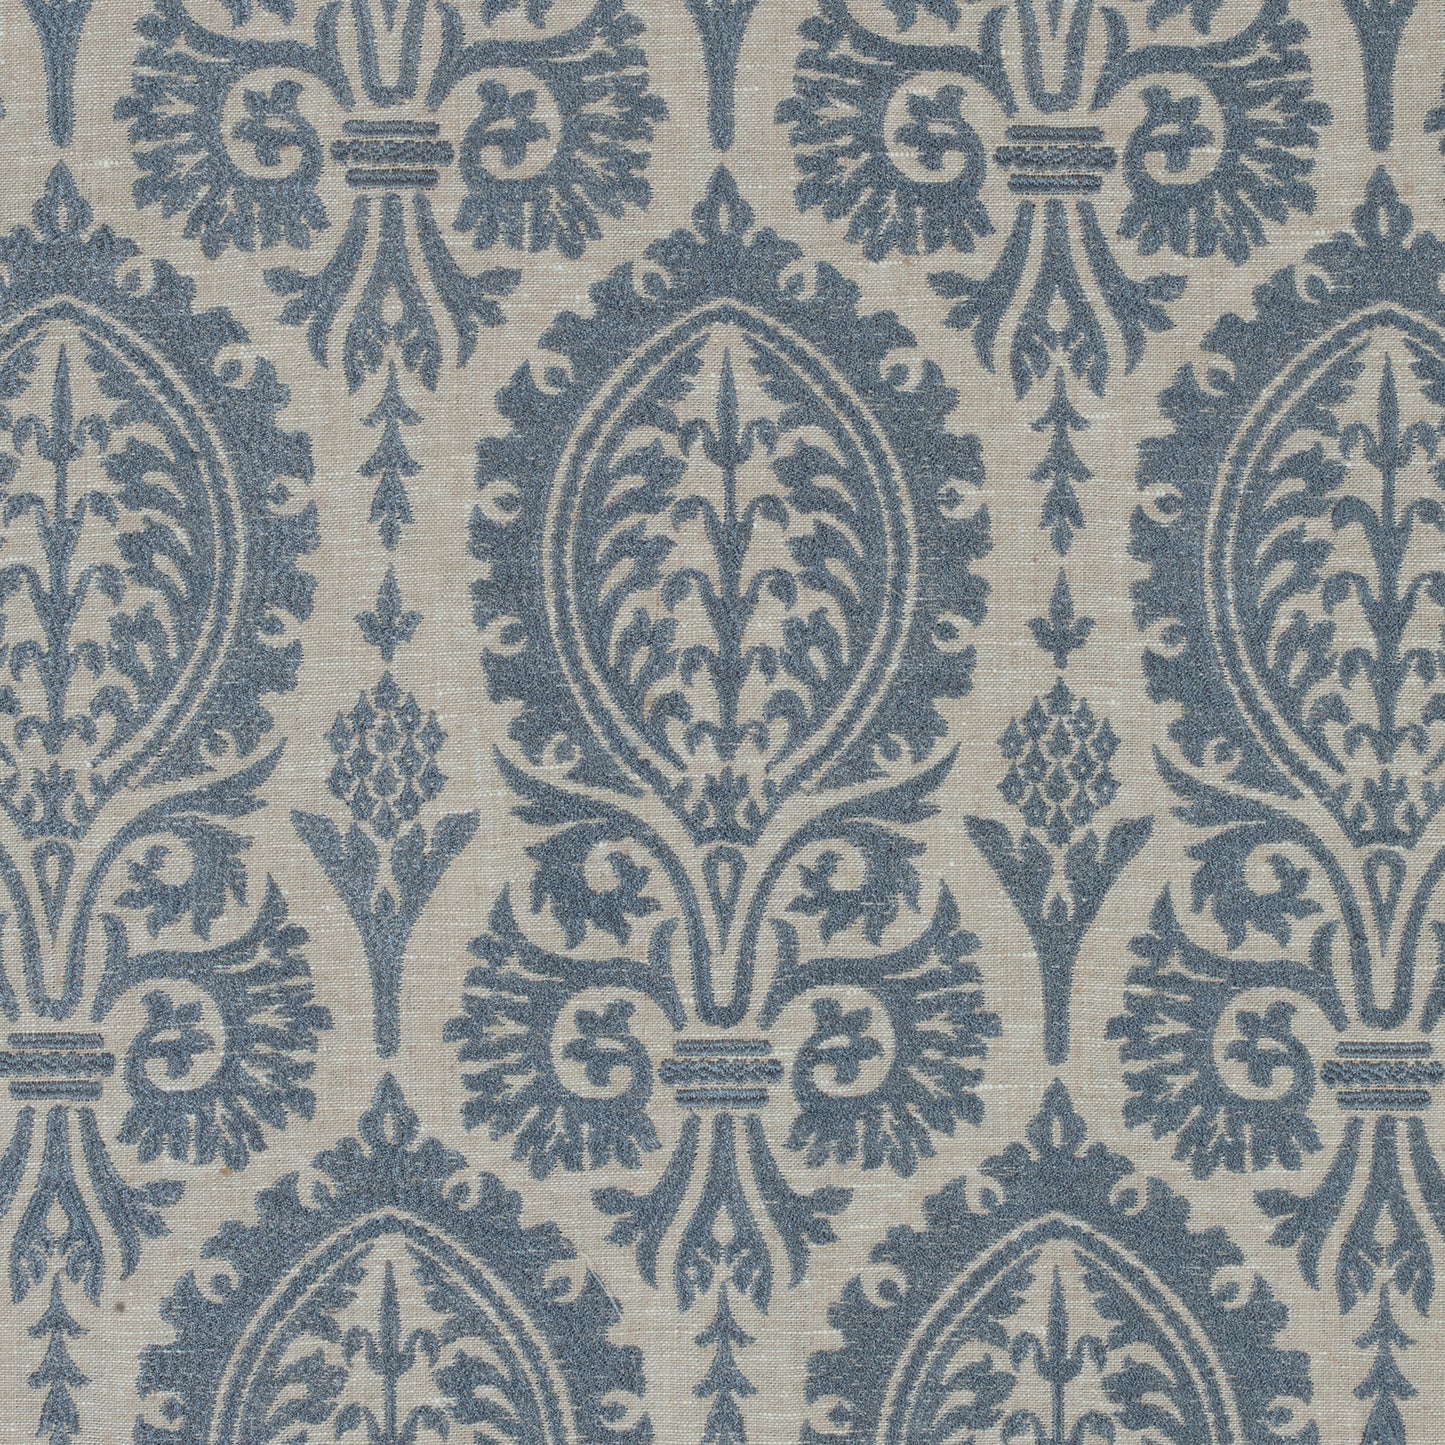 Purchase Thibaut Fabric Item# W772571 pattern name Sir Thomas Embroidery color Slate Blue